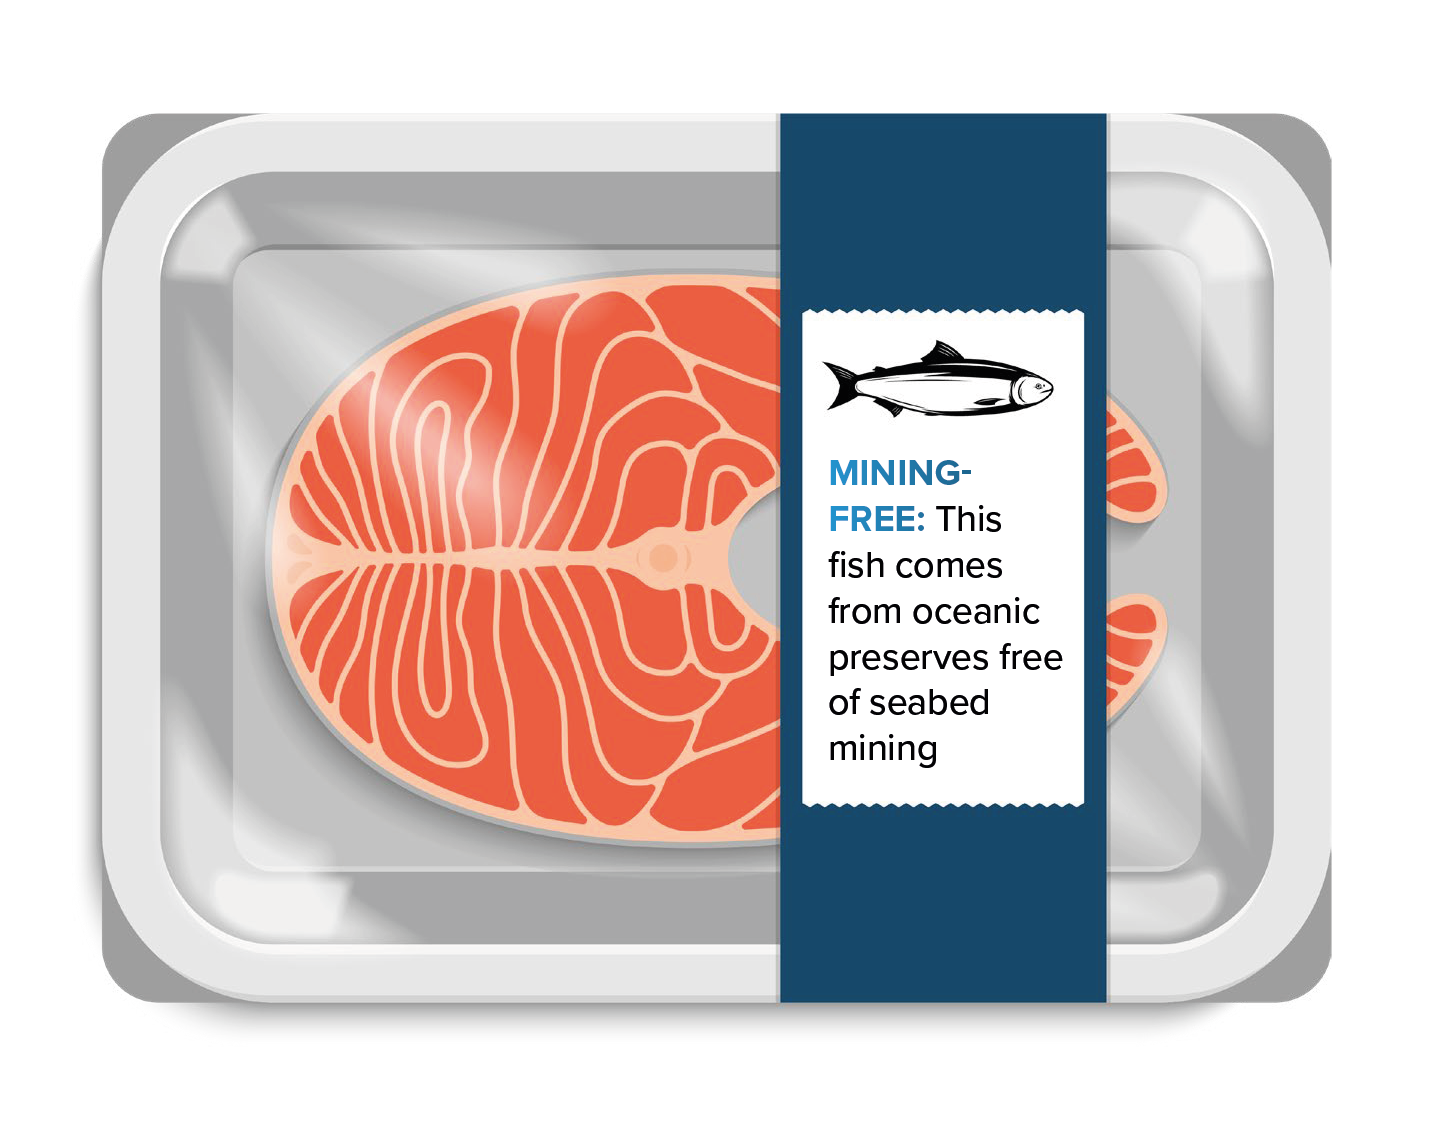 Image of a packaged fresh fish. Label on fresh fish in the supermarket of 2040: Mining-free: this fish comes from oceanic preserves free of seabed mining. 